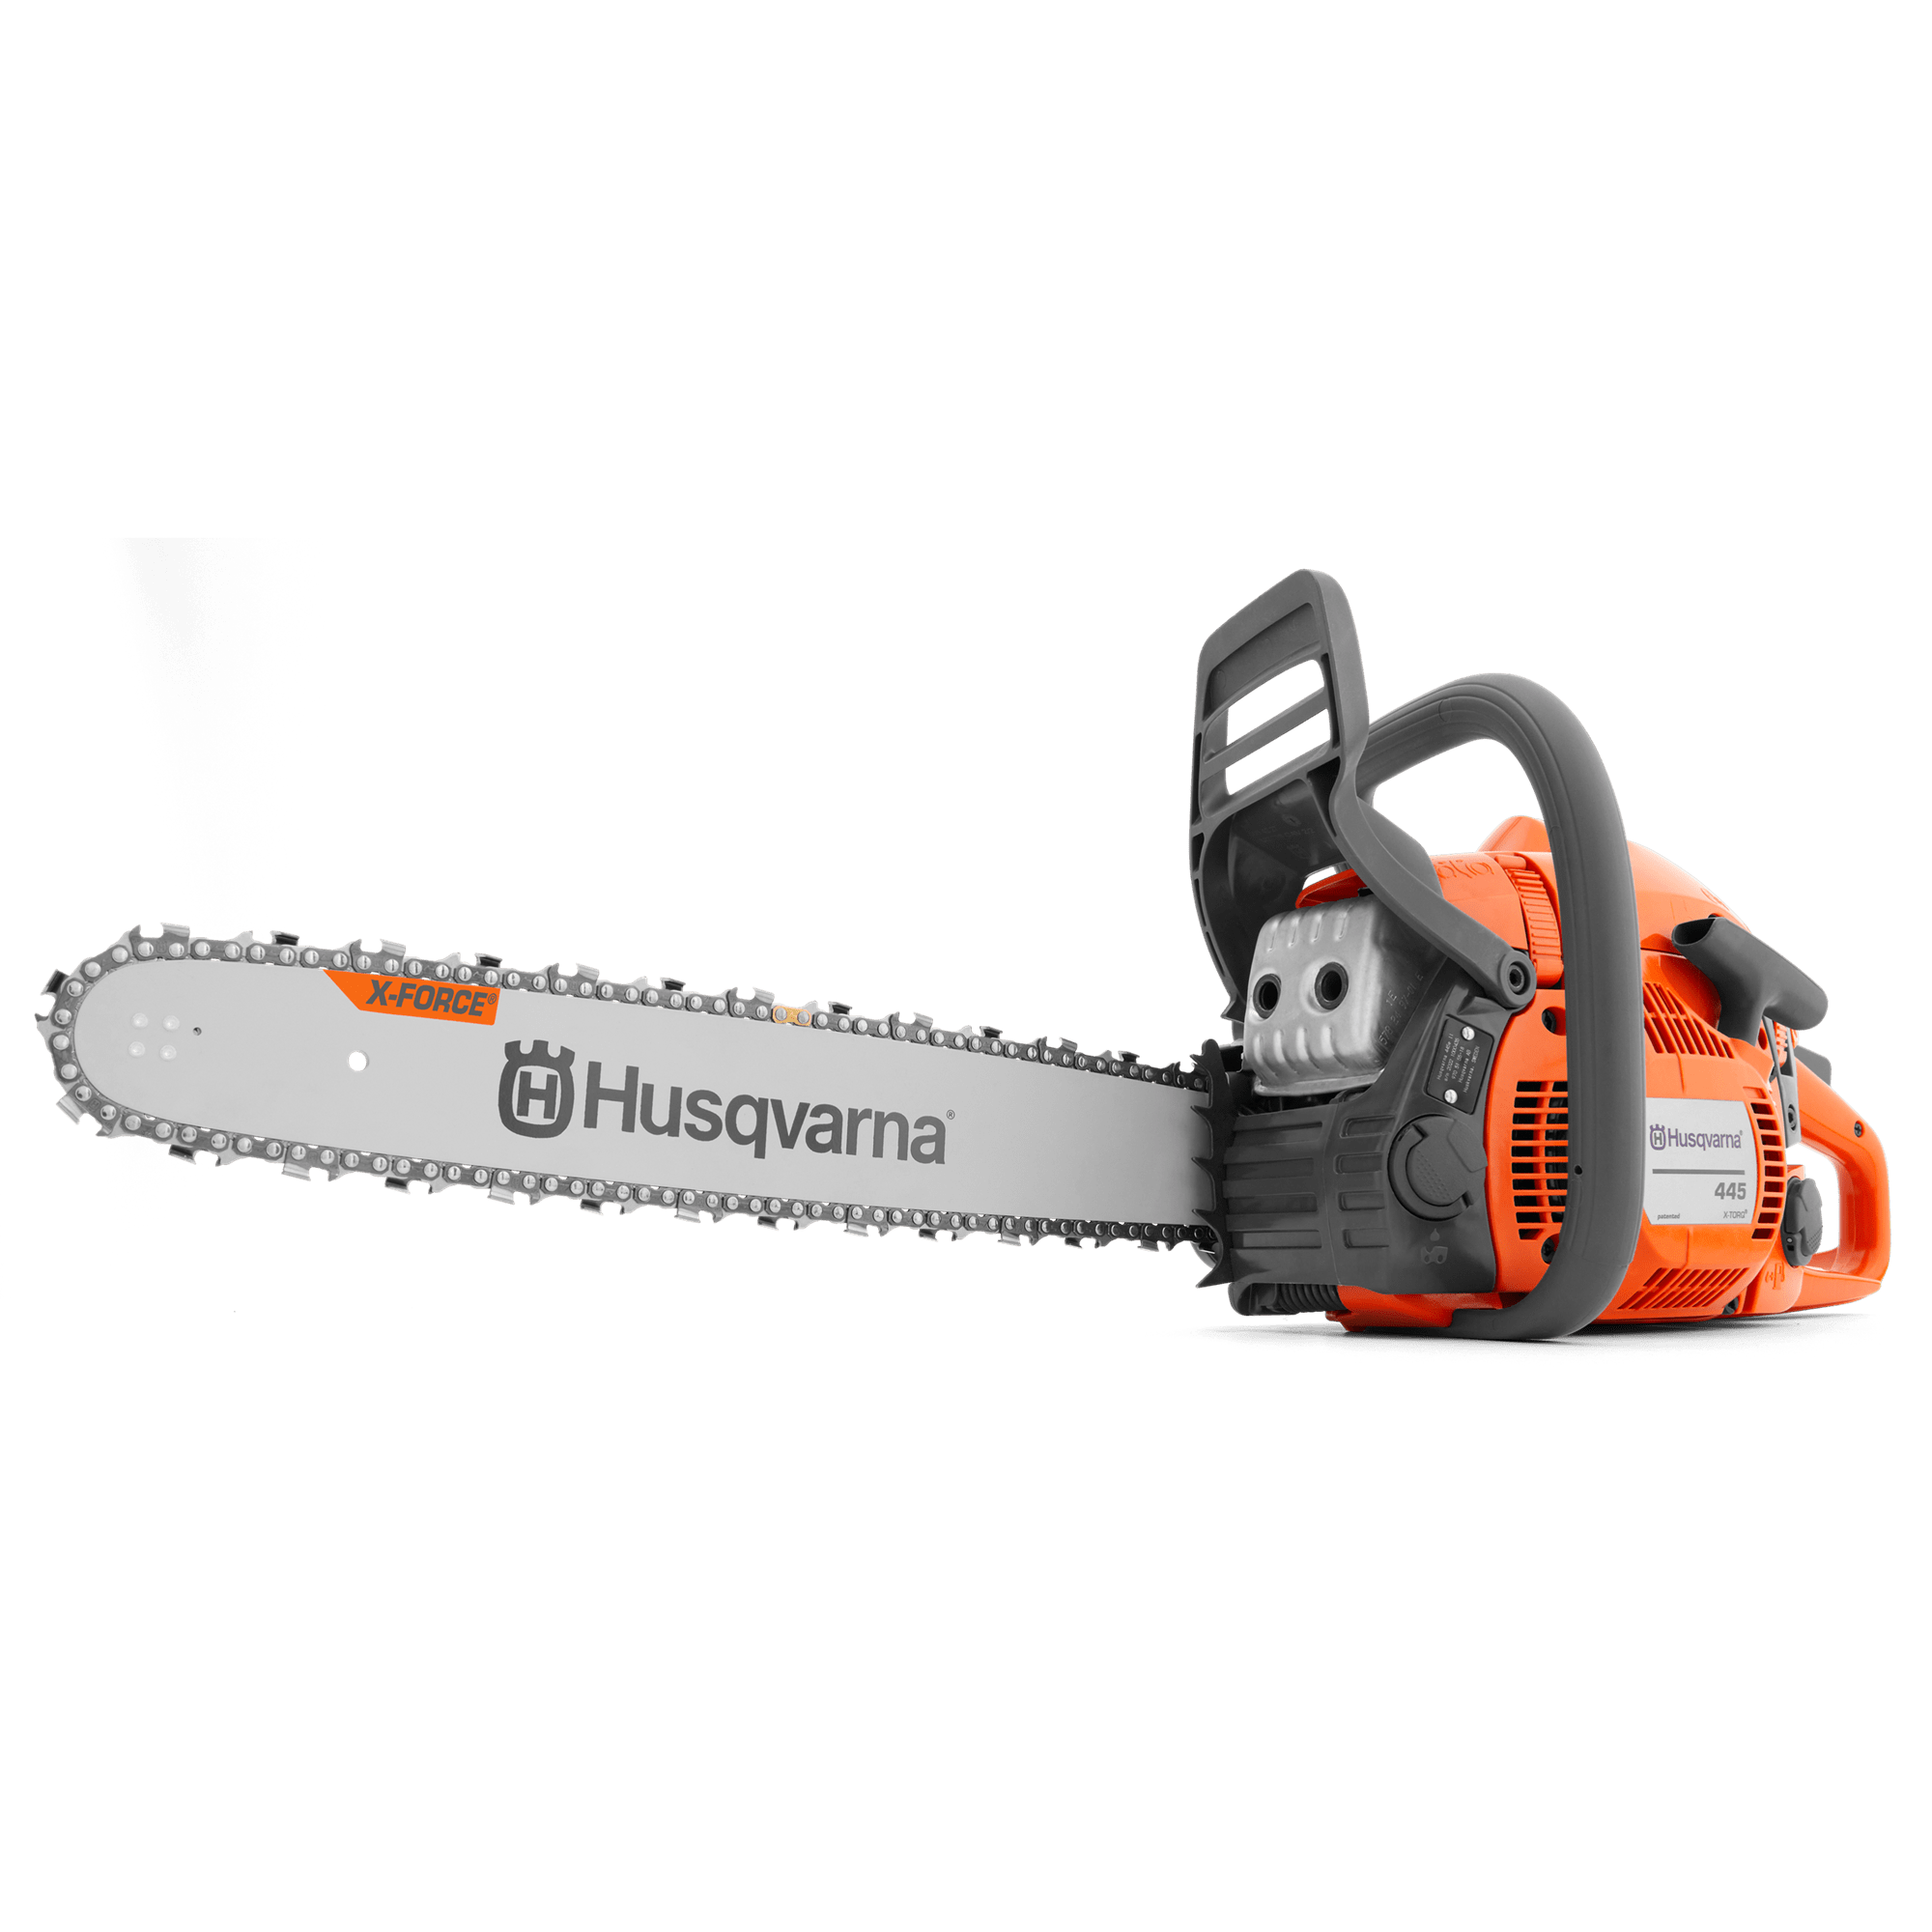 Image for 445 Gas Chainsaw                                                                                                                 from HusqvarnaB2C